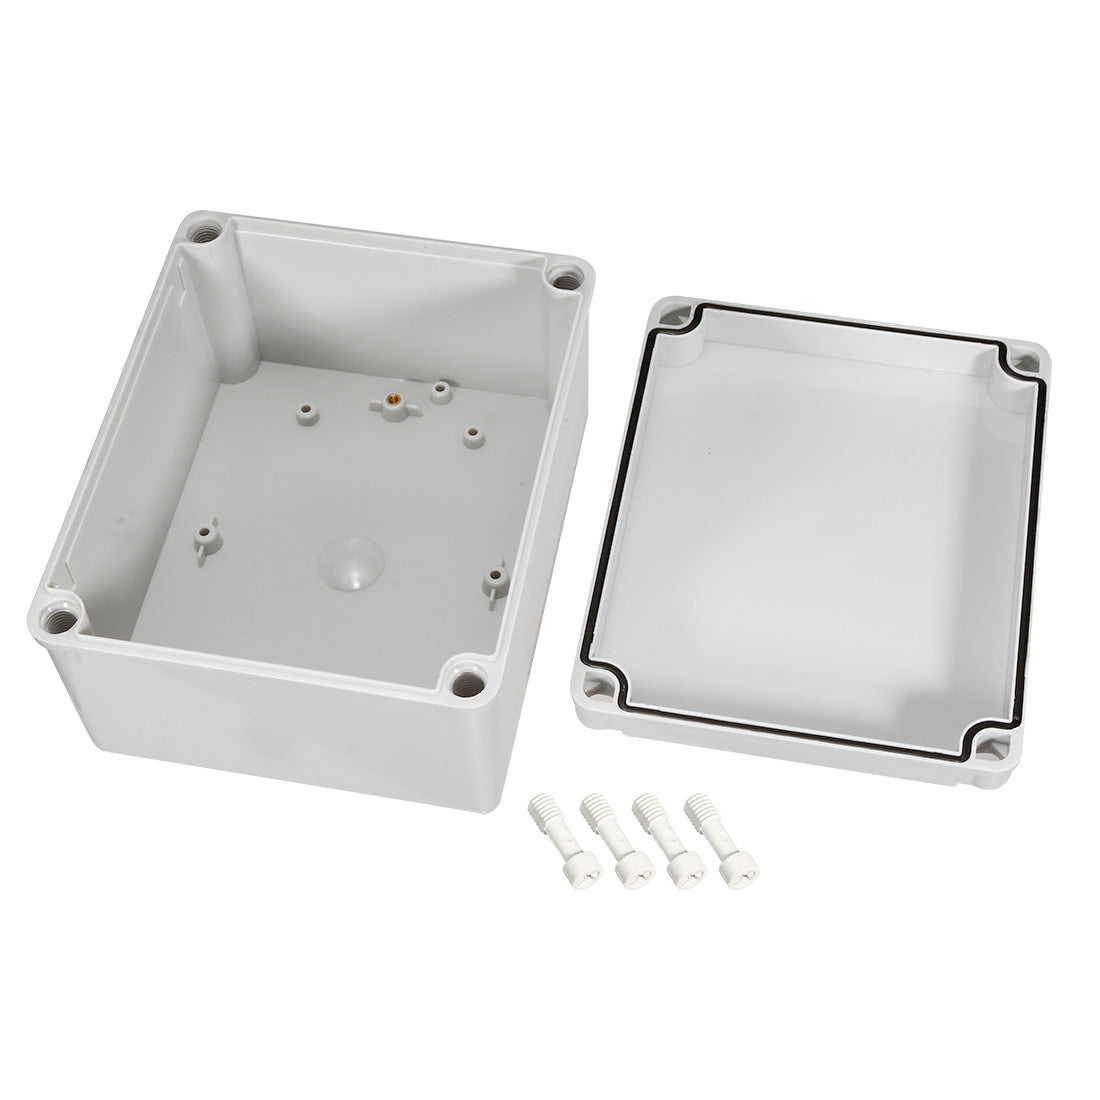 uxcell Uxcell 170*140*95mm Electronic ABS Plastic DIY Junction Box Enclosure Case Gray